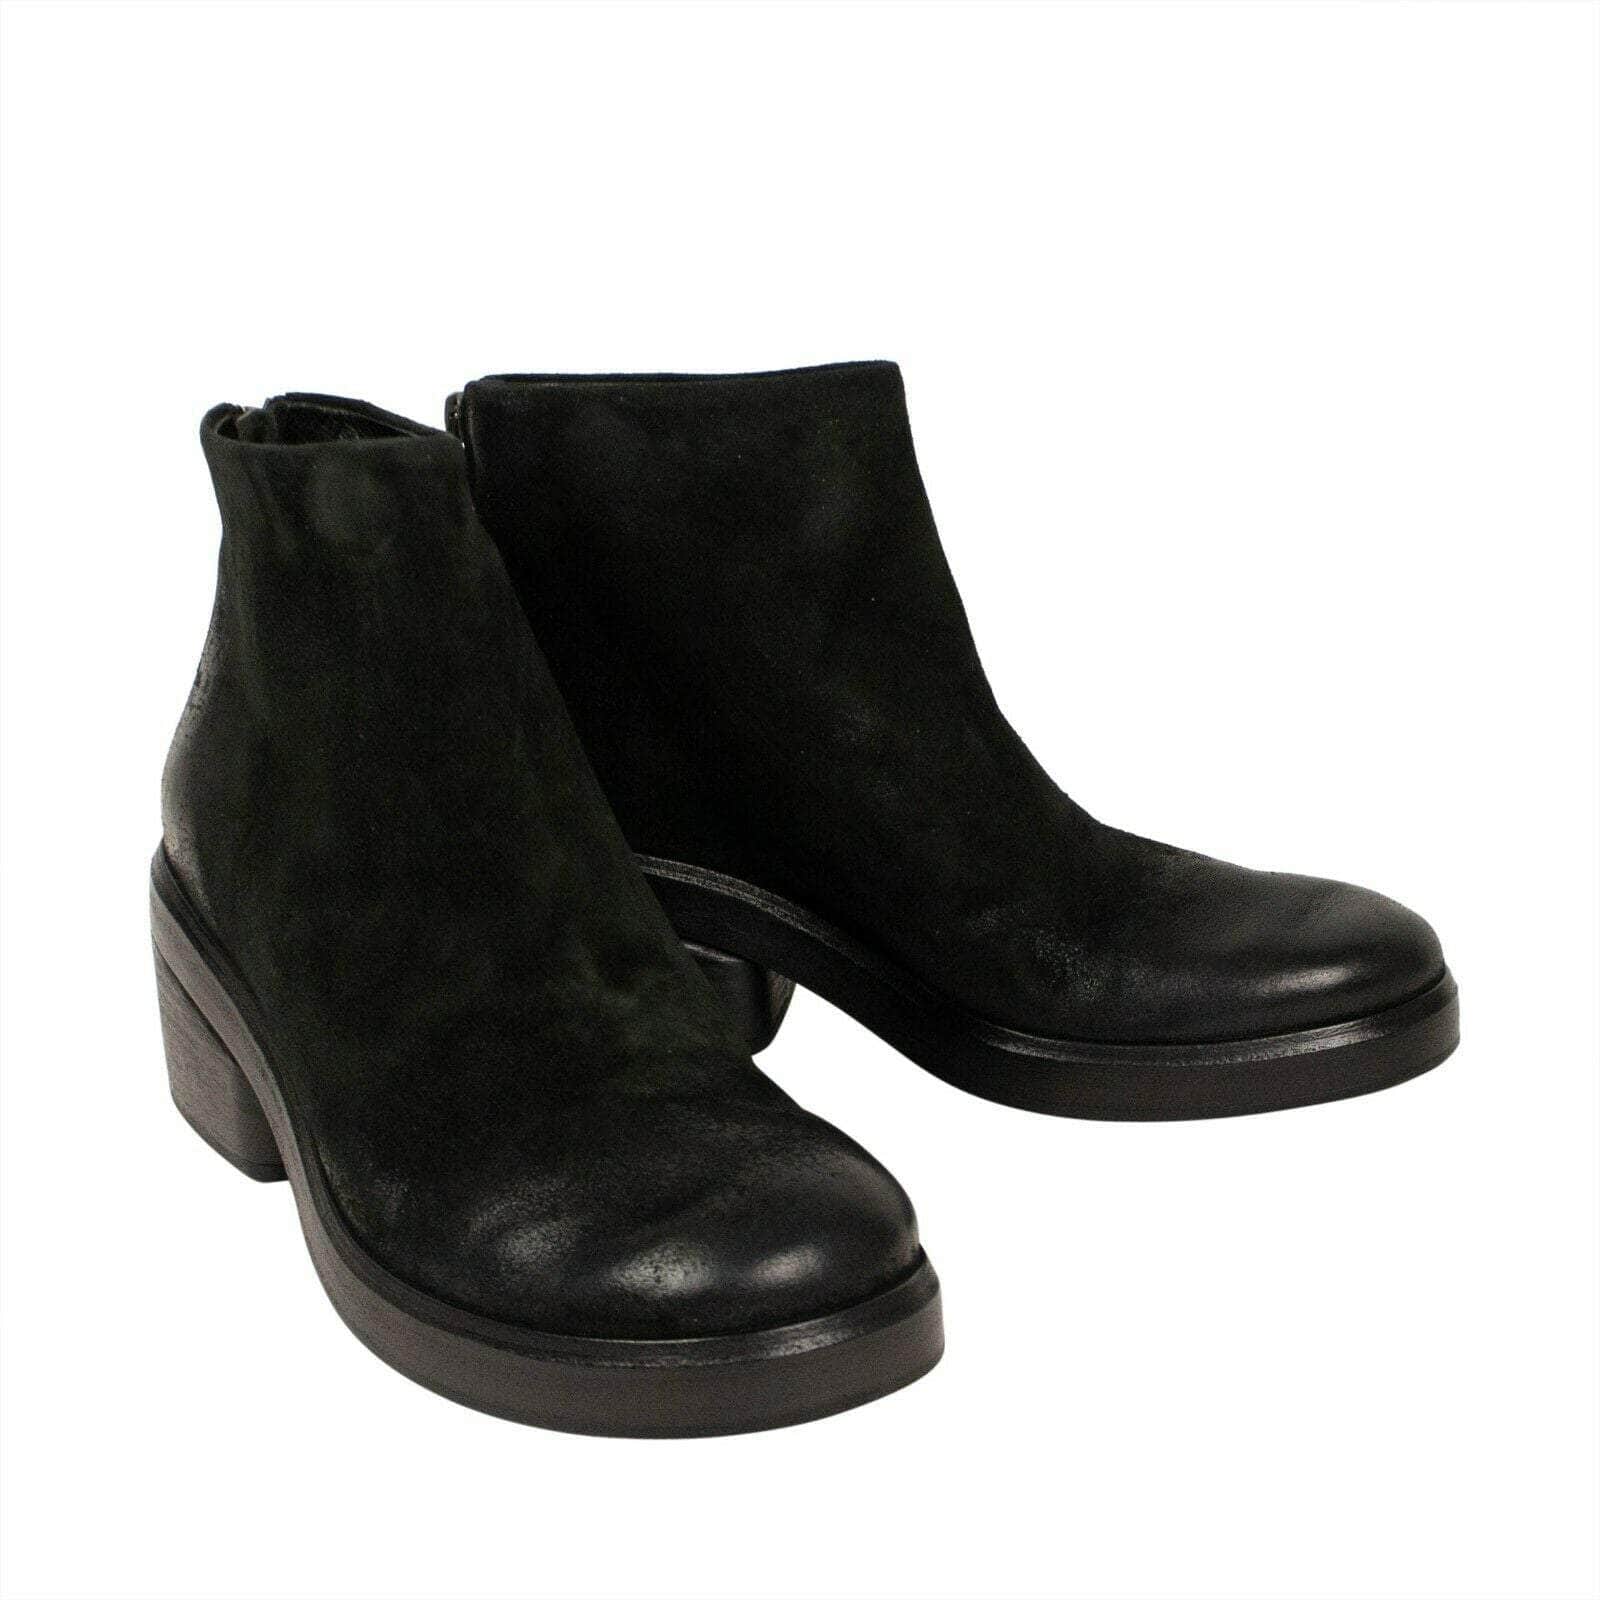 Marsell channelenable-all, chicmi, couponcollection, gender-womens, main-shoes, marsell, shop375, size-9, under-250, womens-booties 9 Bo Ceppo' Black Distressed Leather Ankle Boots 69LE-2100/9 69LE-2100/9